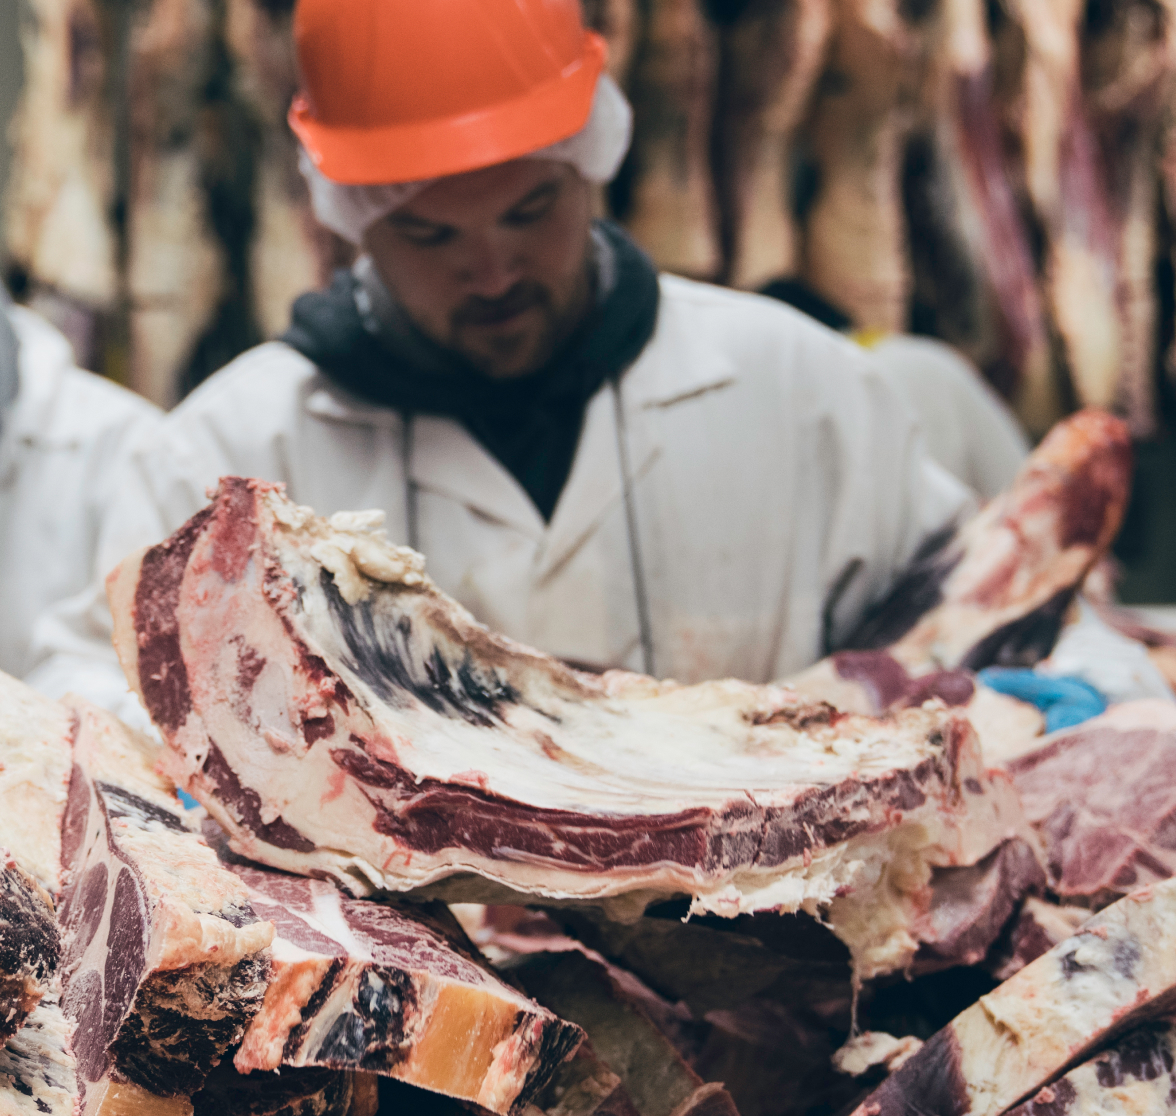 Man in butcher shop wearing orange hard hat and white lab coat surrounded by cuts of raw meat.